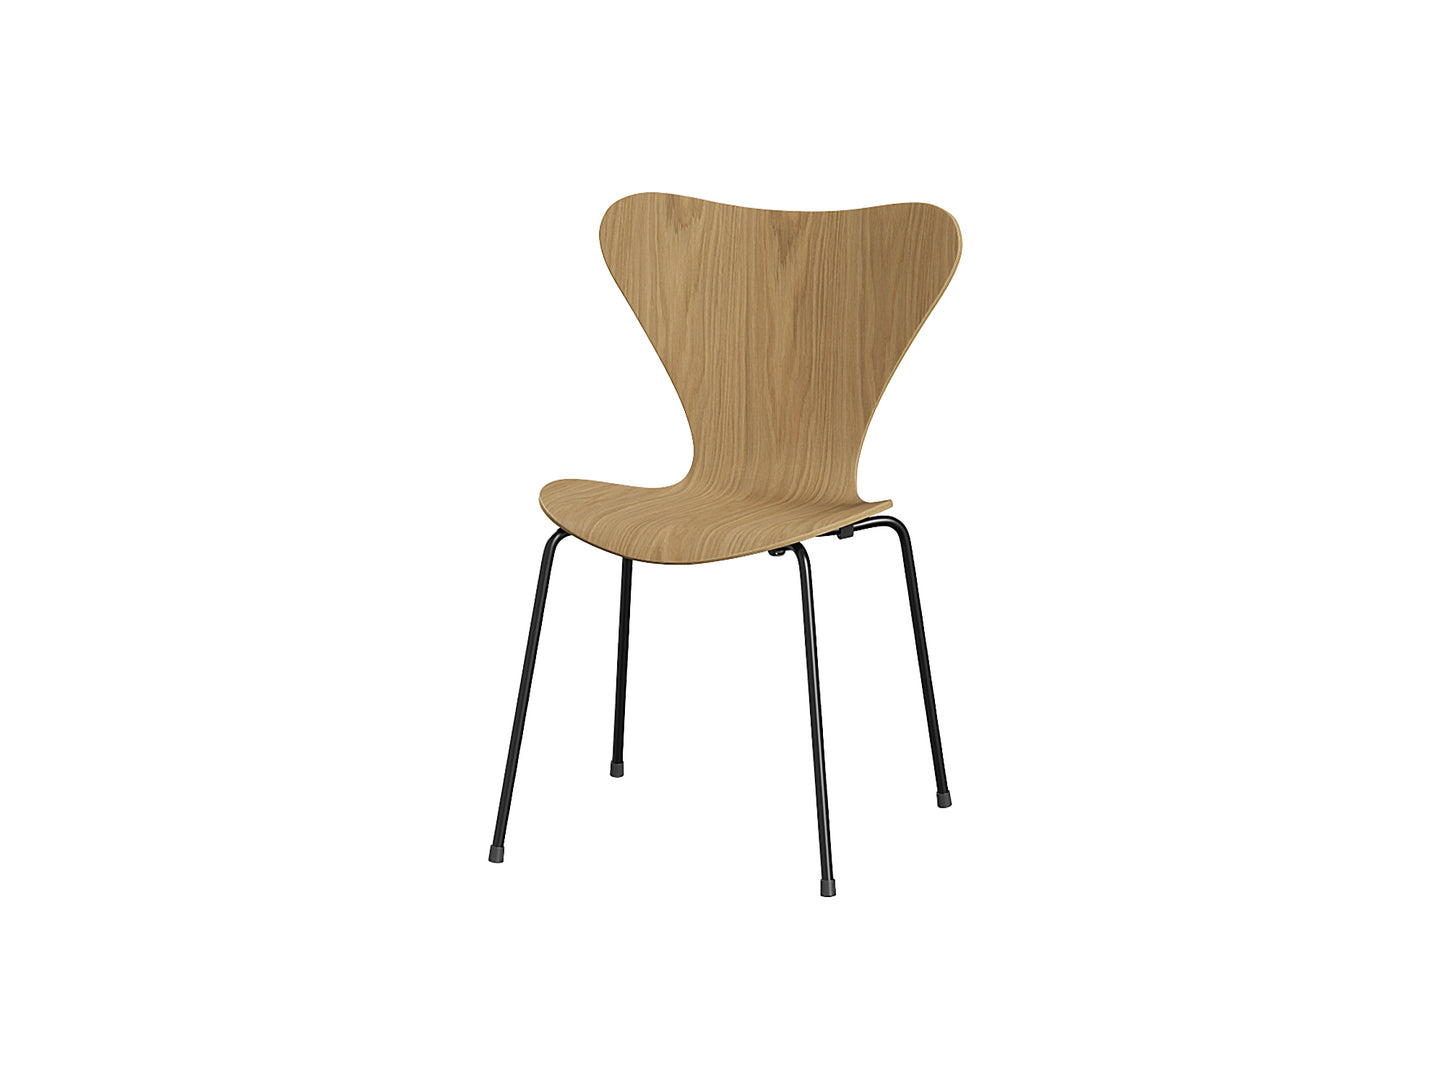 Series 7 Dining Chair (Clear Lacquered Wood) by Fritz Hanse - Oak / Black Steel